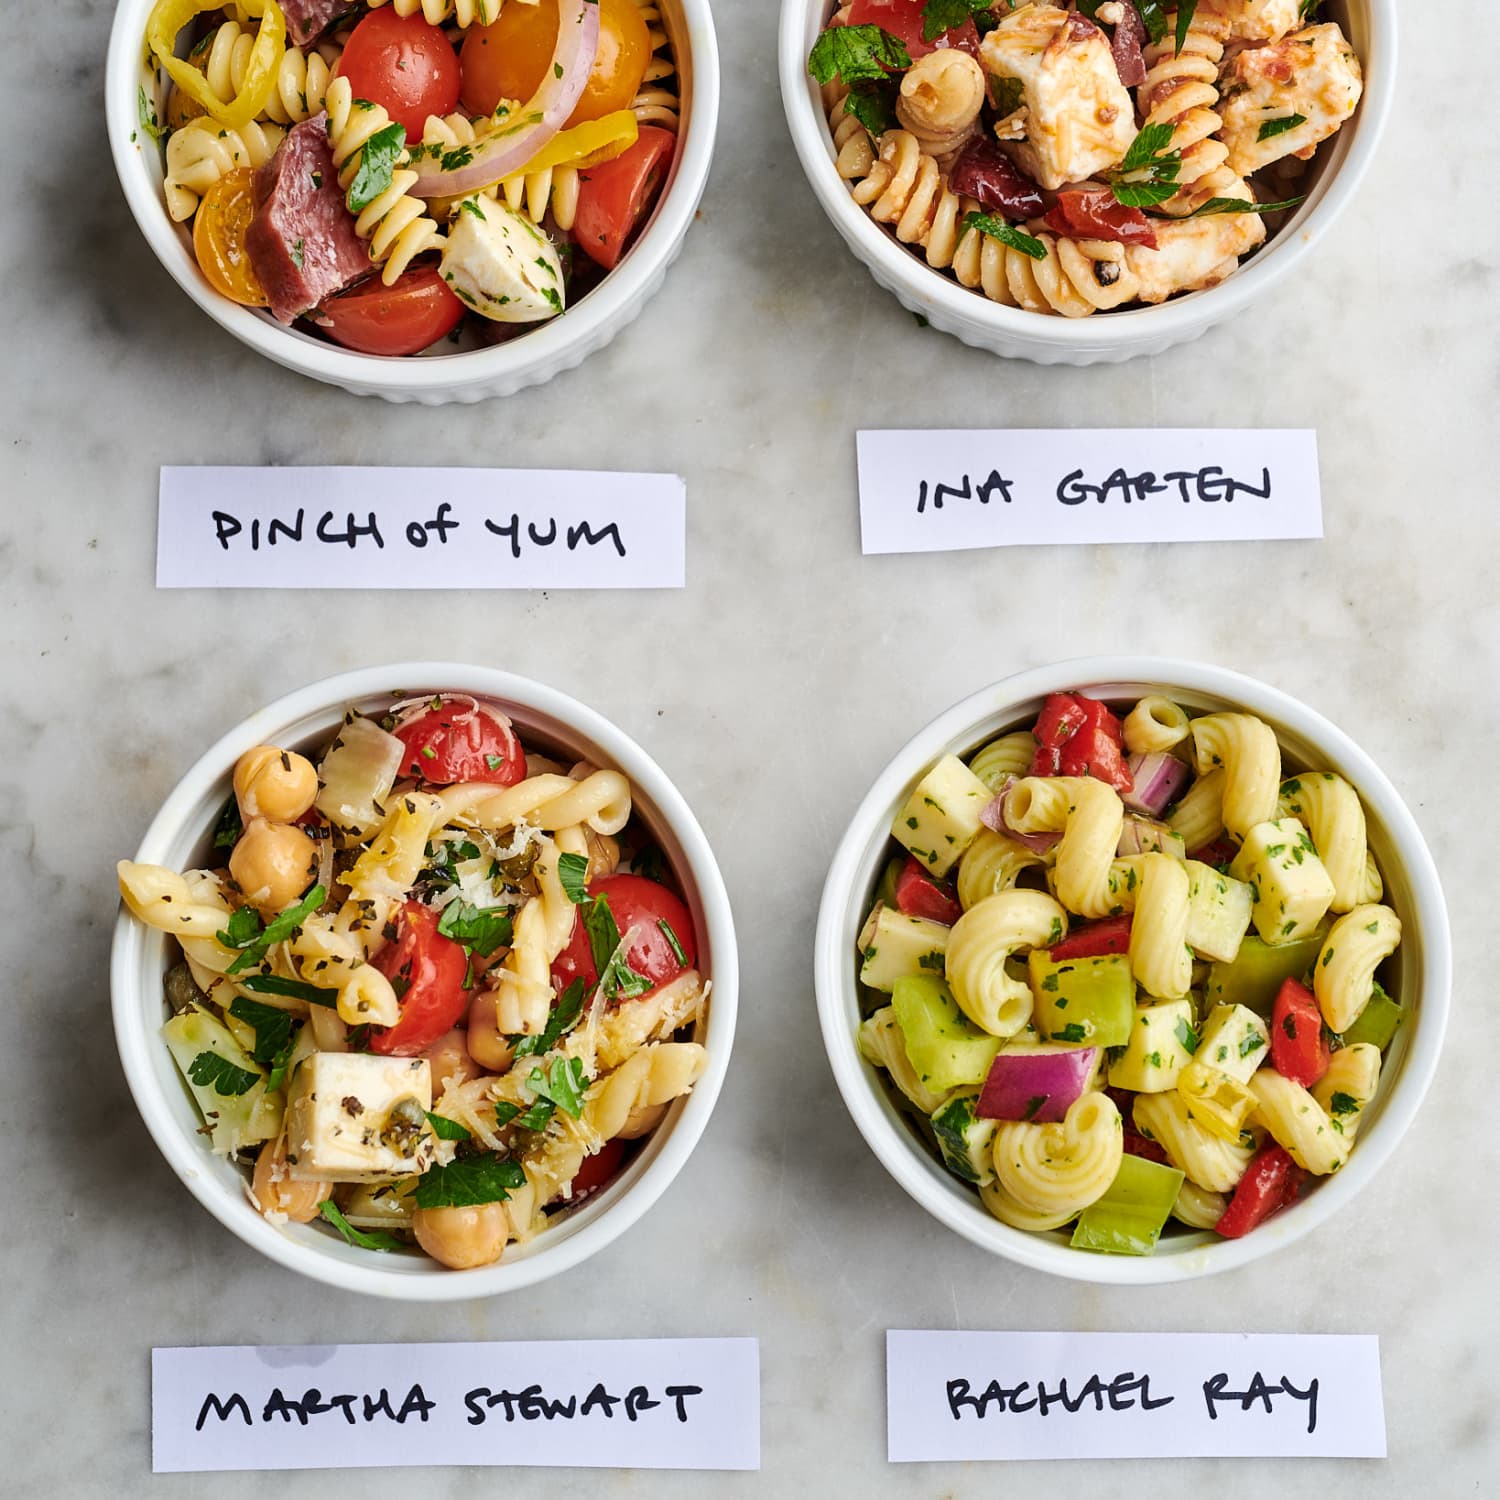 We Tried 4 Popular Pasta Salad Recipes Here S The One We Liked Best Kitchn